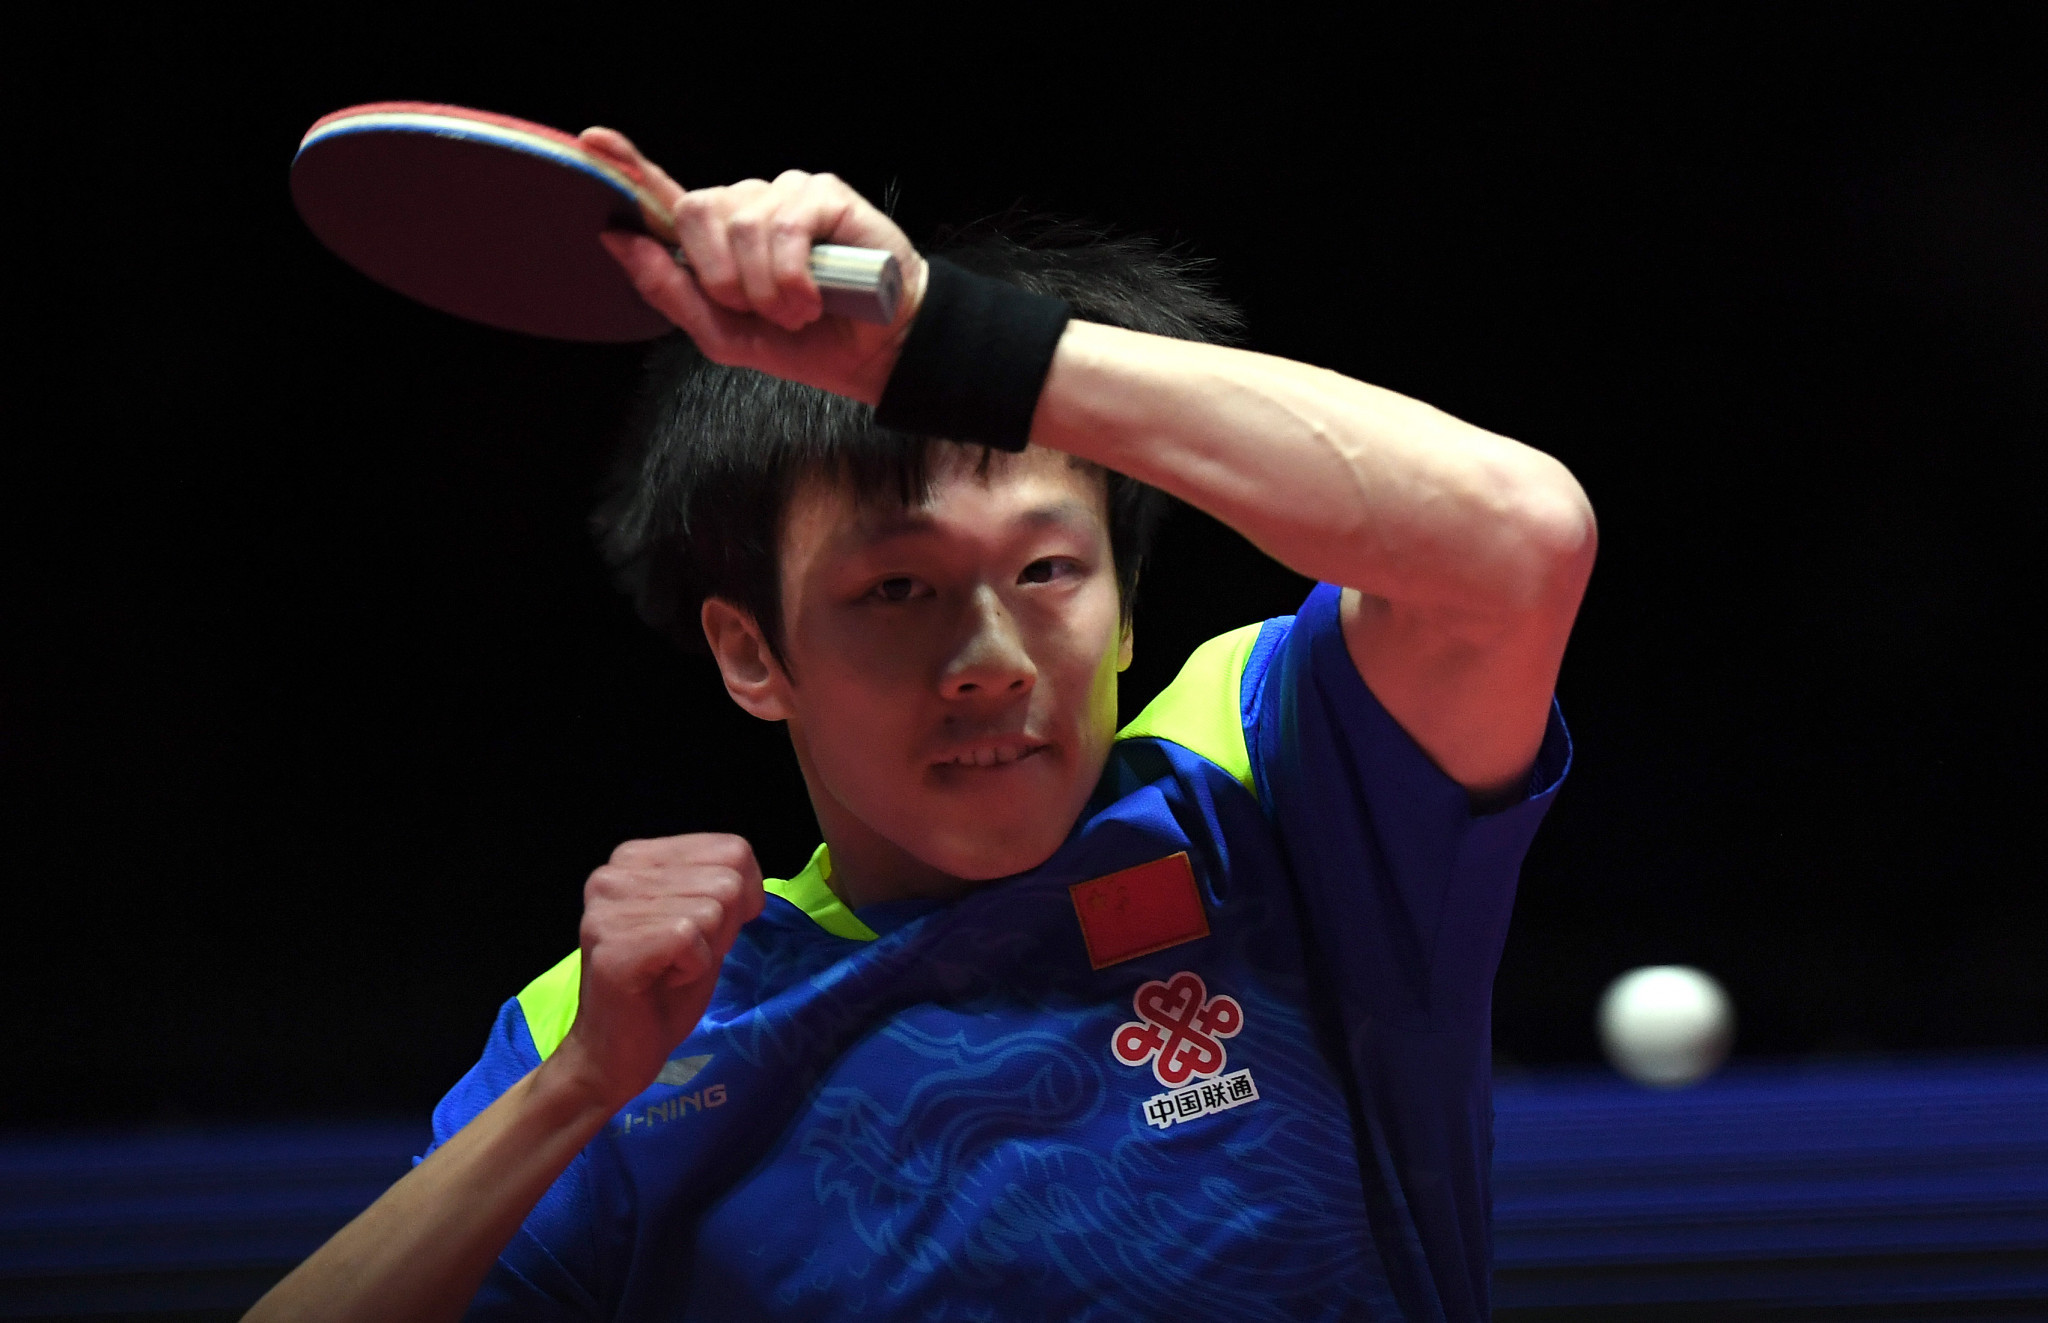 The 12 events all offer ranking points, which will be used to determine the top 16 men’s and women’s players who will qualify for the ITTF World Tour Grand Finals in December 2020 ©Getty Images